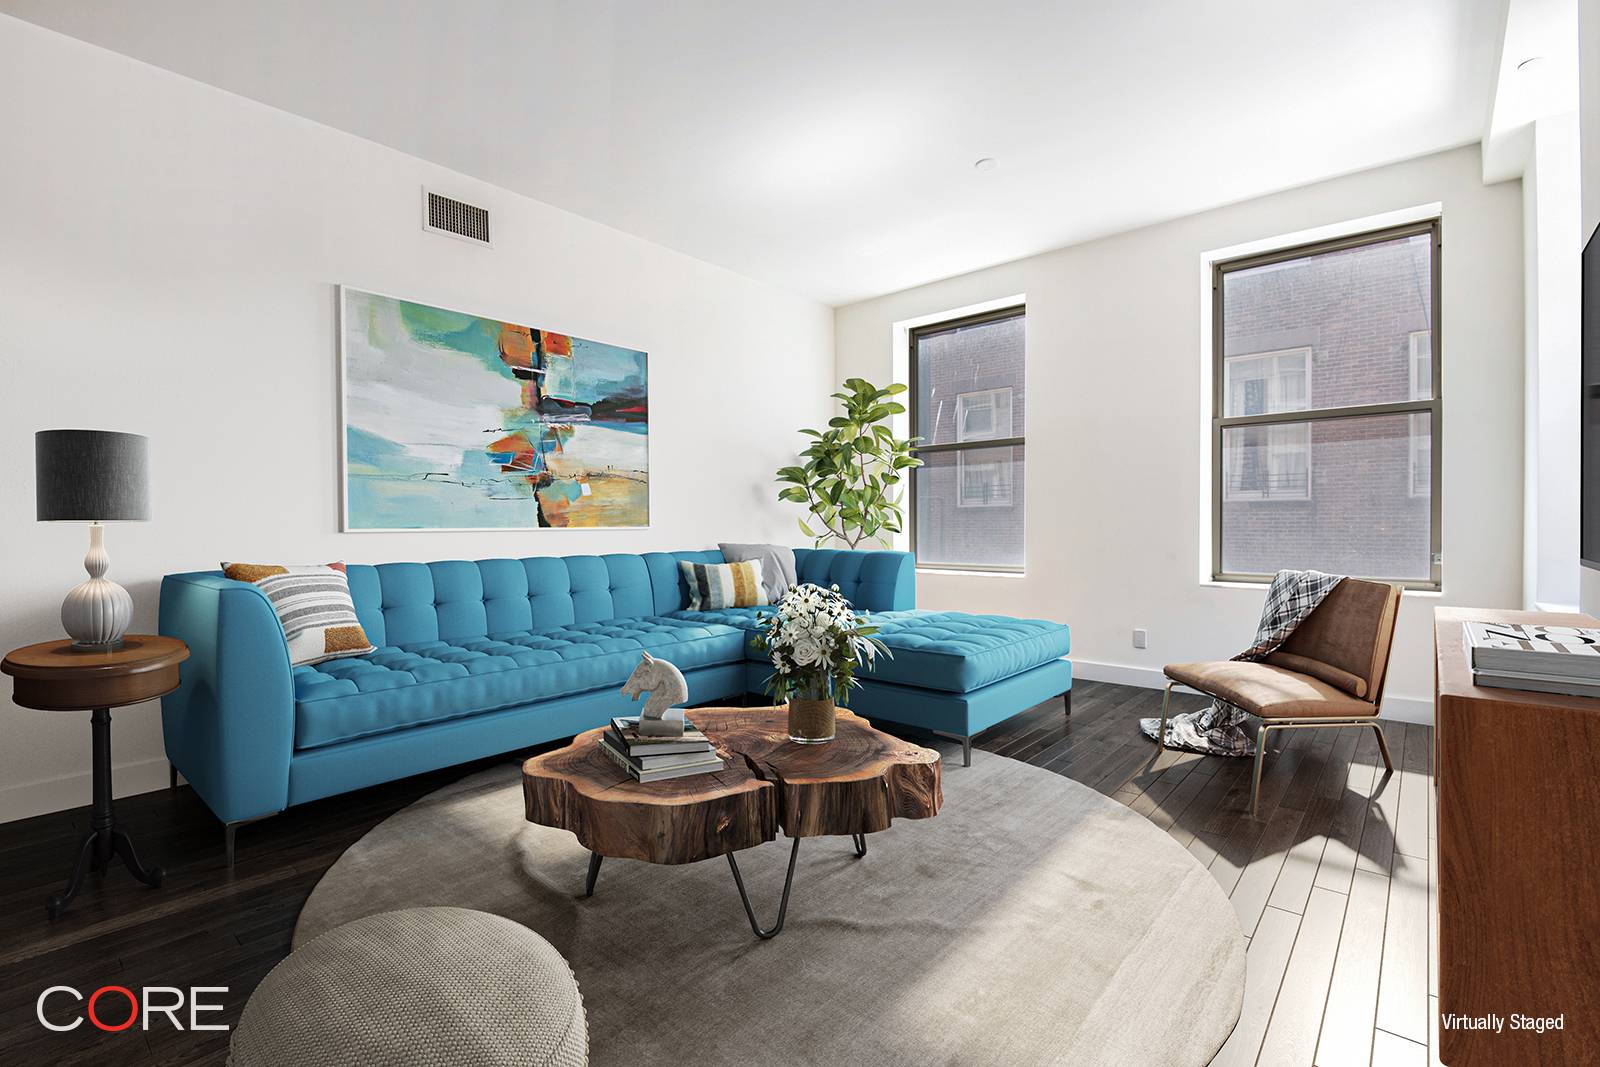 Located in the heart of Tribeca, 83 Franklin is a loft conversion that is unparalleled in its category.